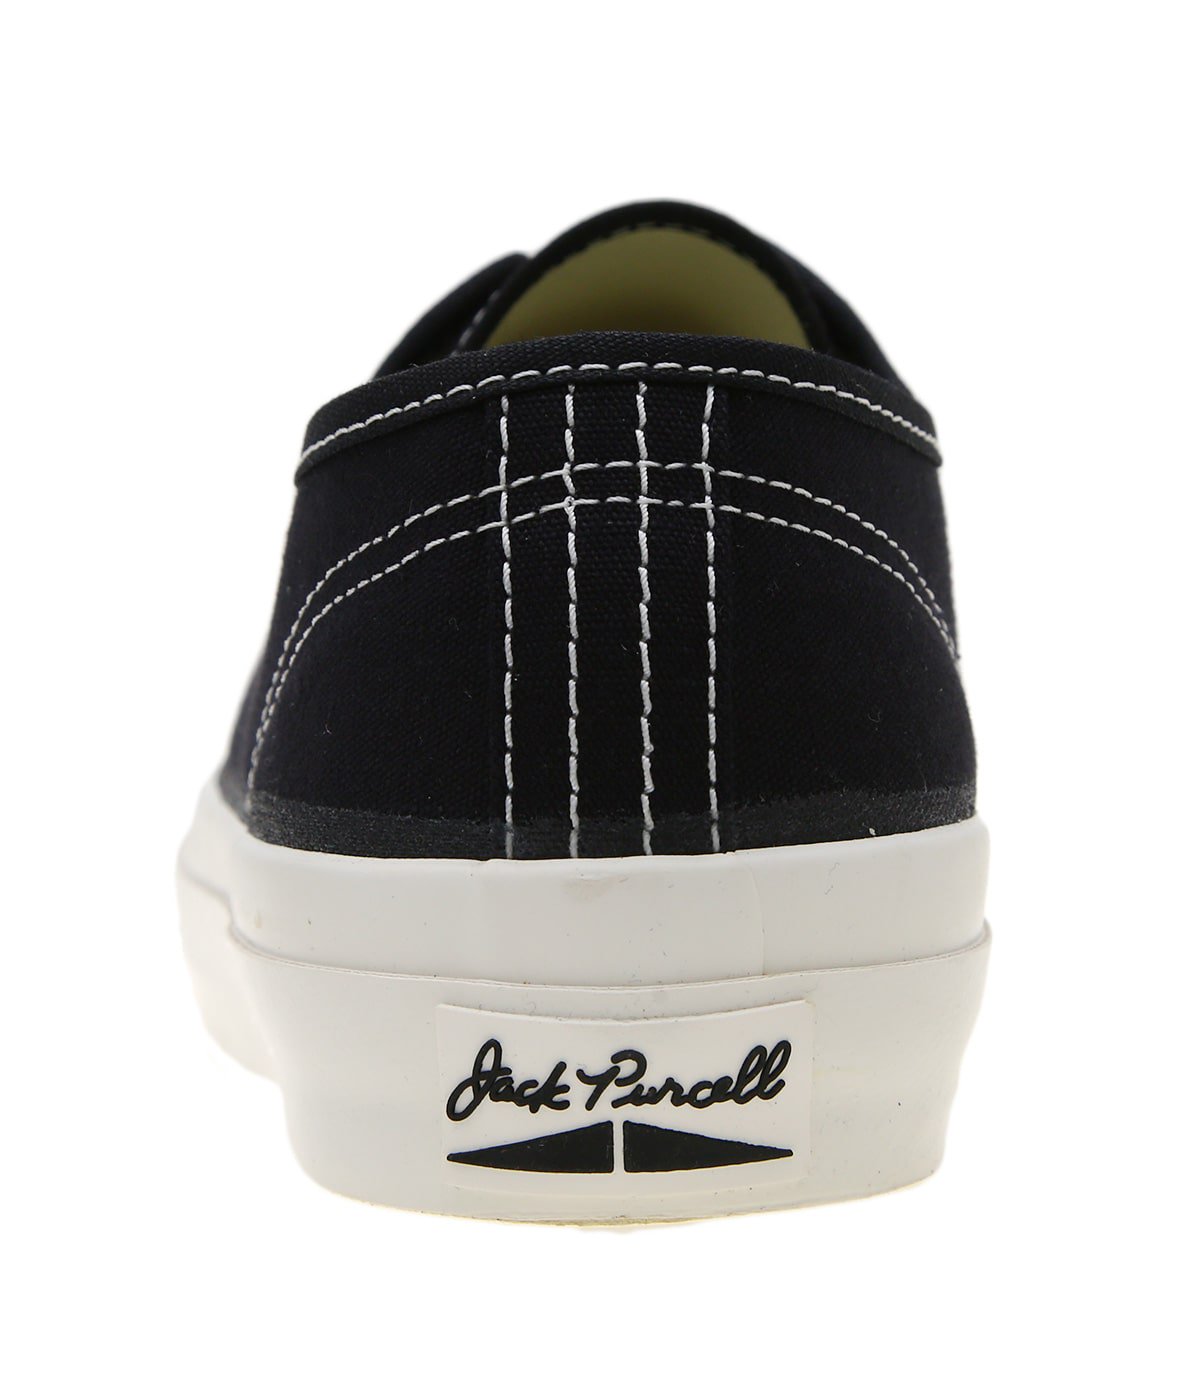 JACK PURCELL CANVAS - BLACK -